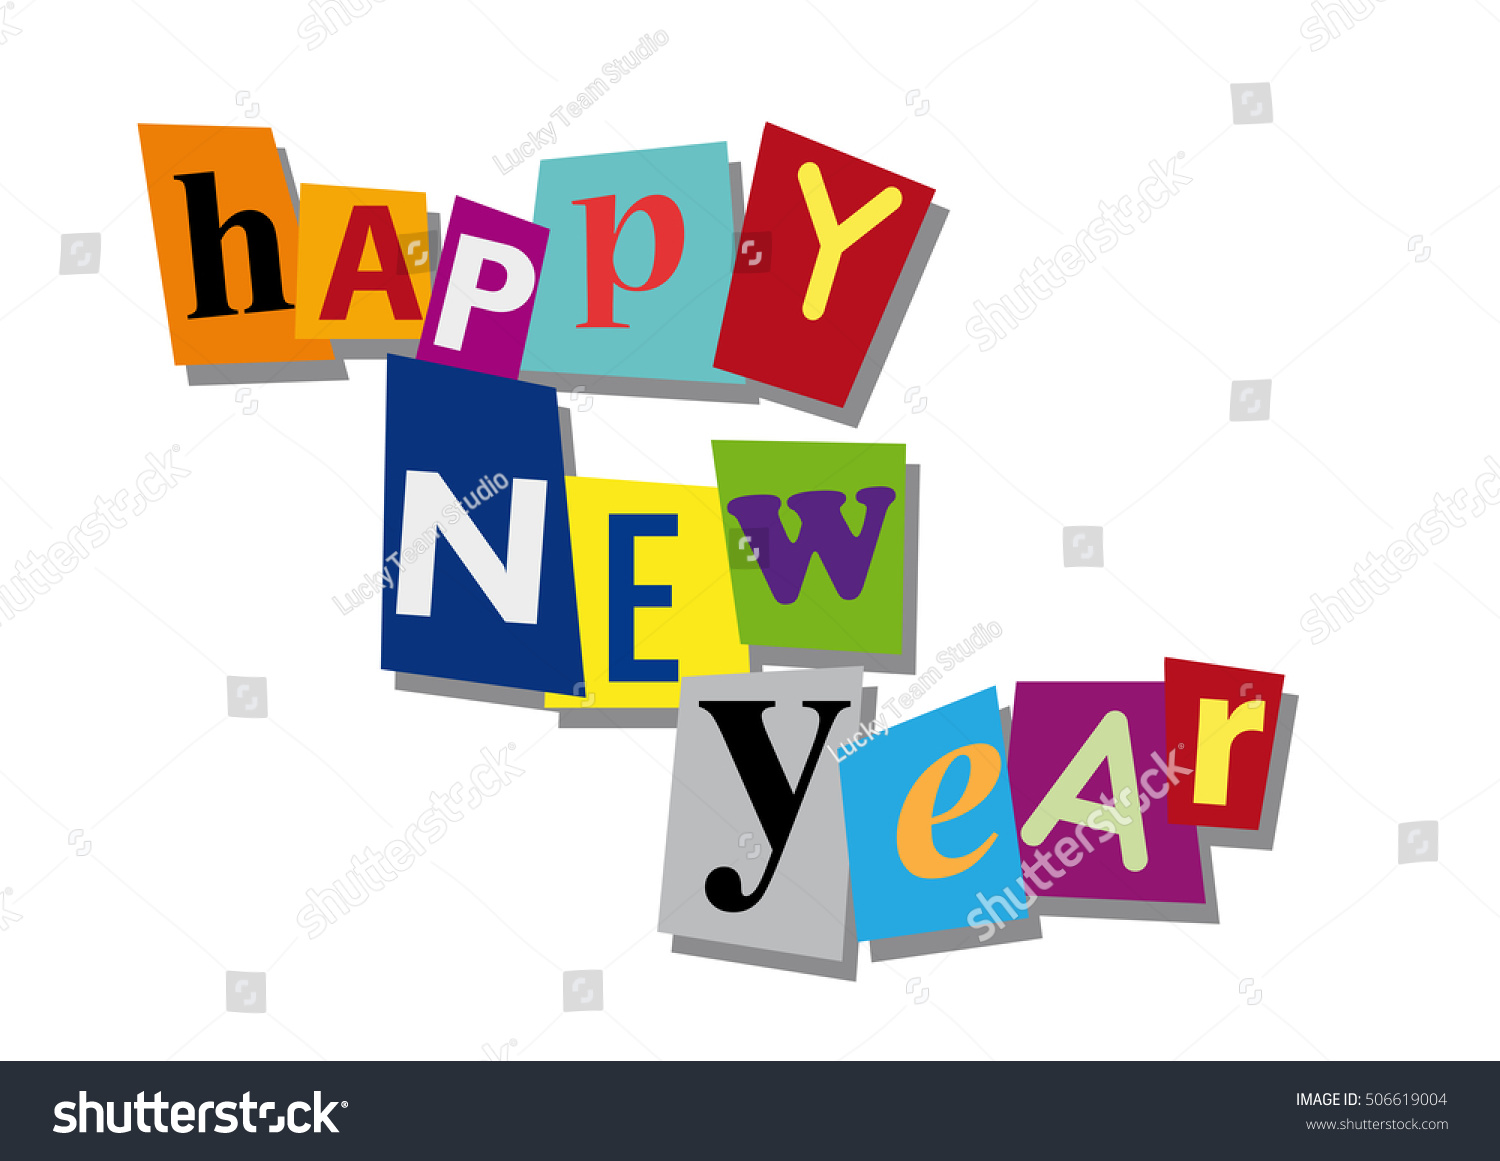 happy-new-year-word-text-cut-stock-vector-royalty-free-506619004